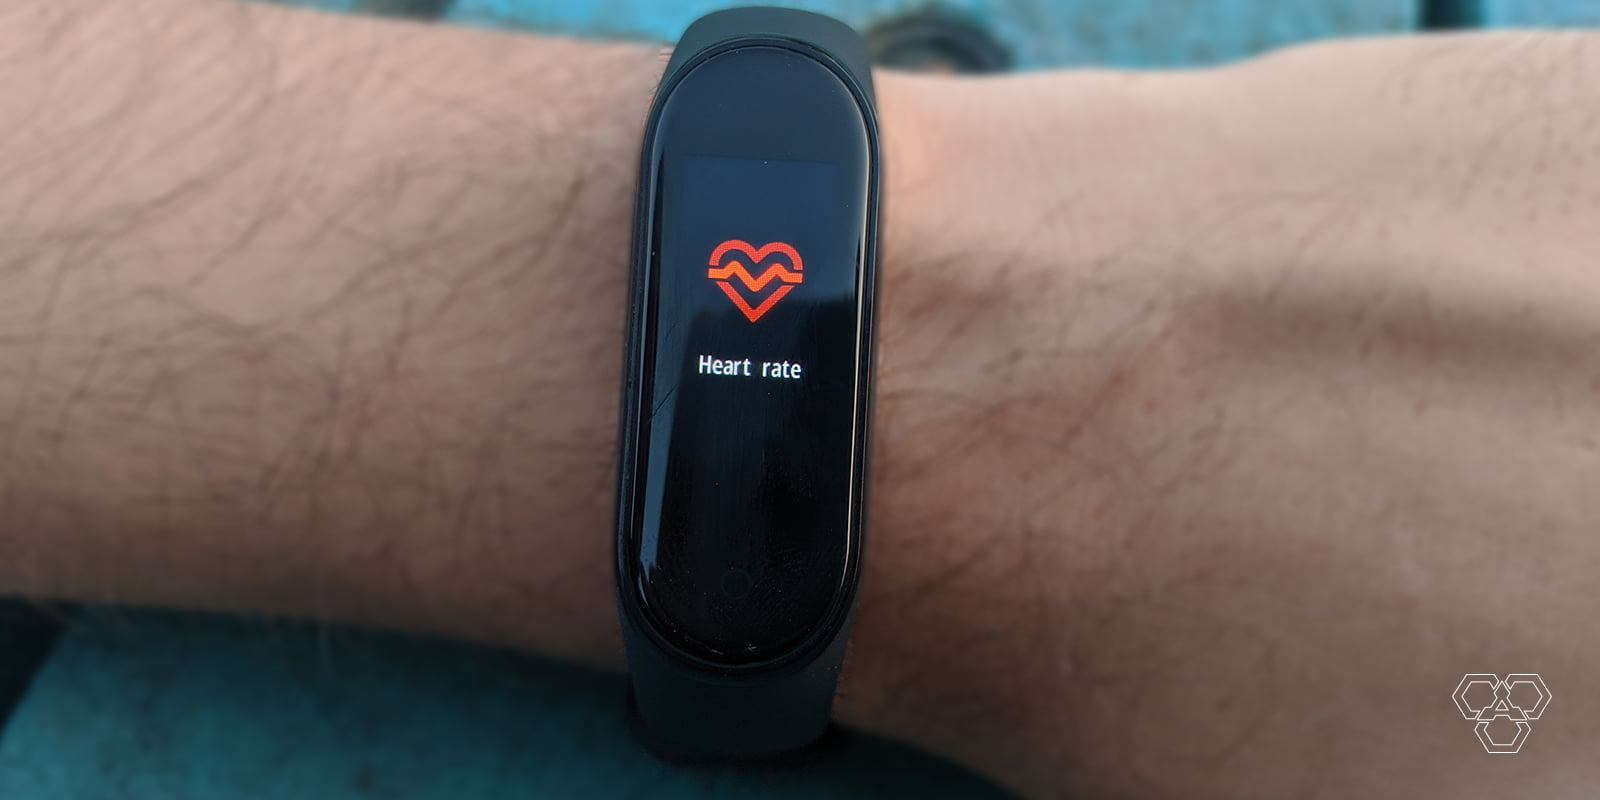 Heart Rate In Mi Band 4